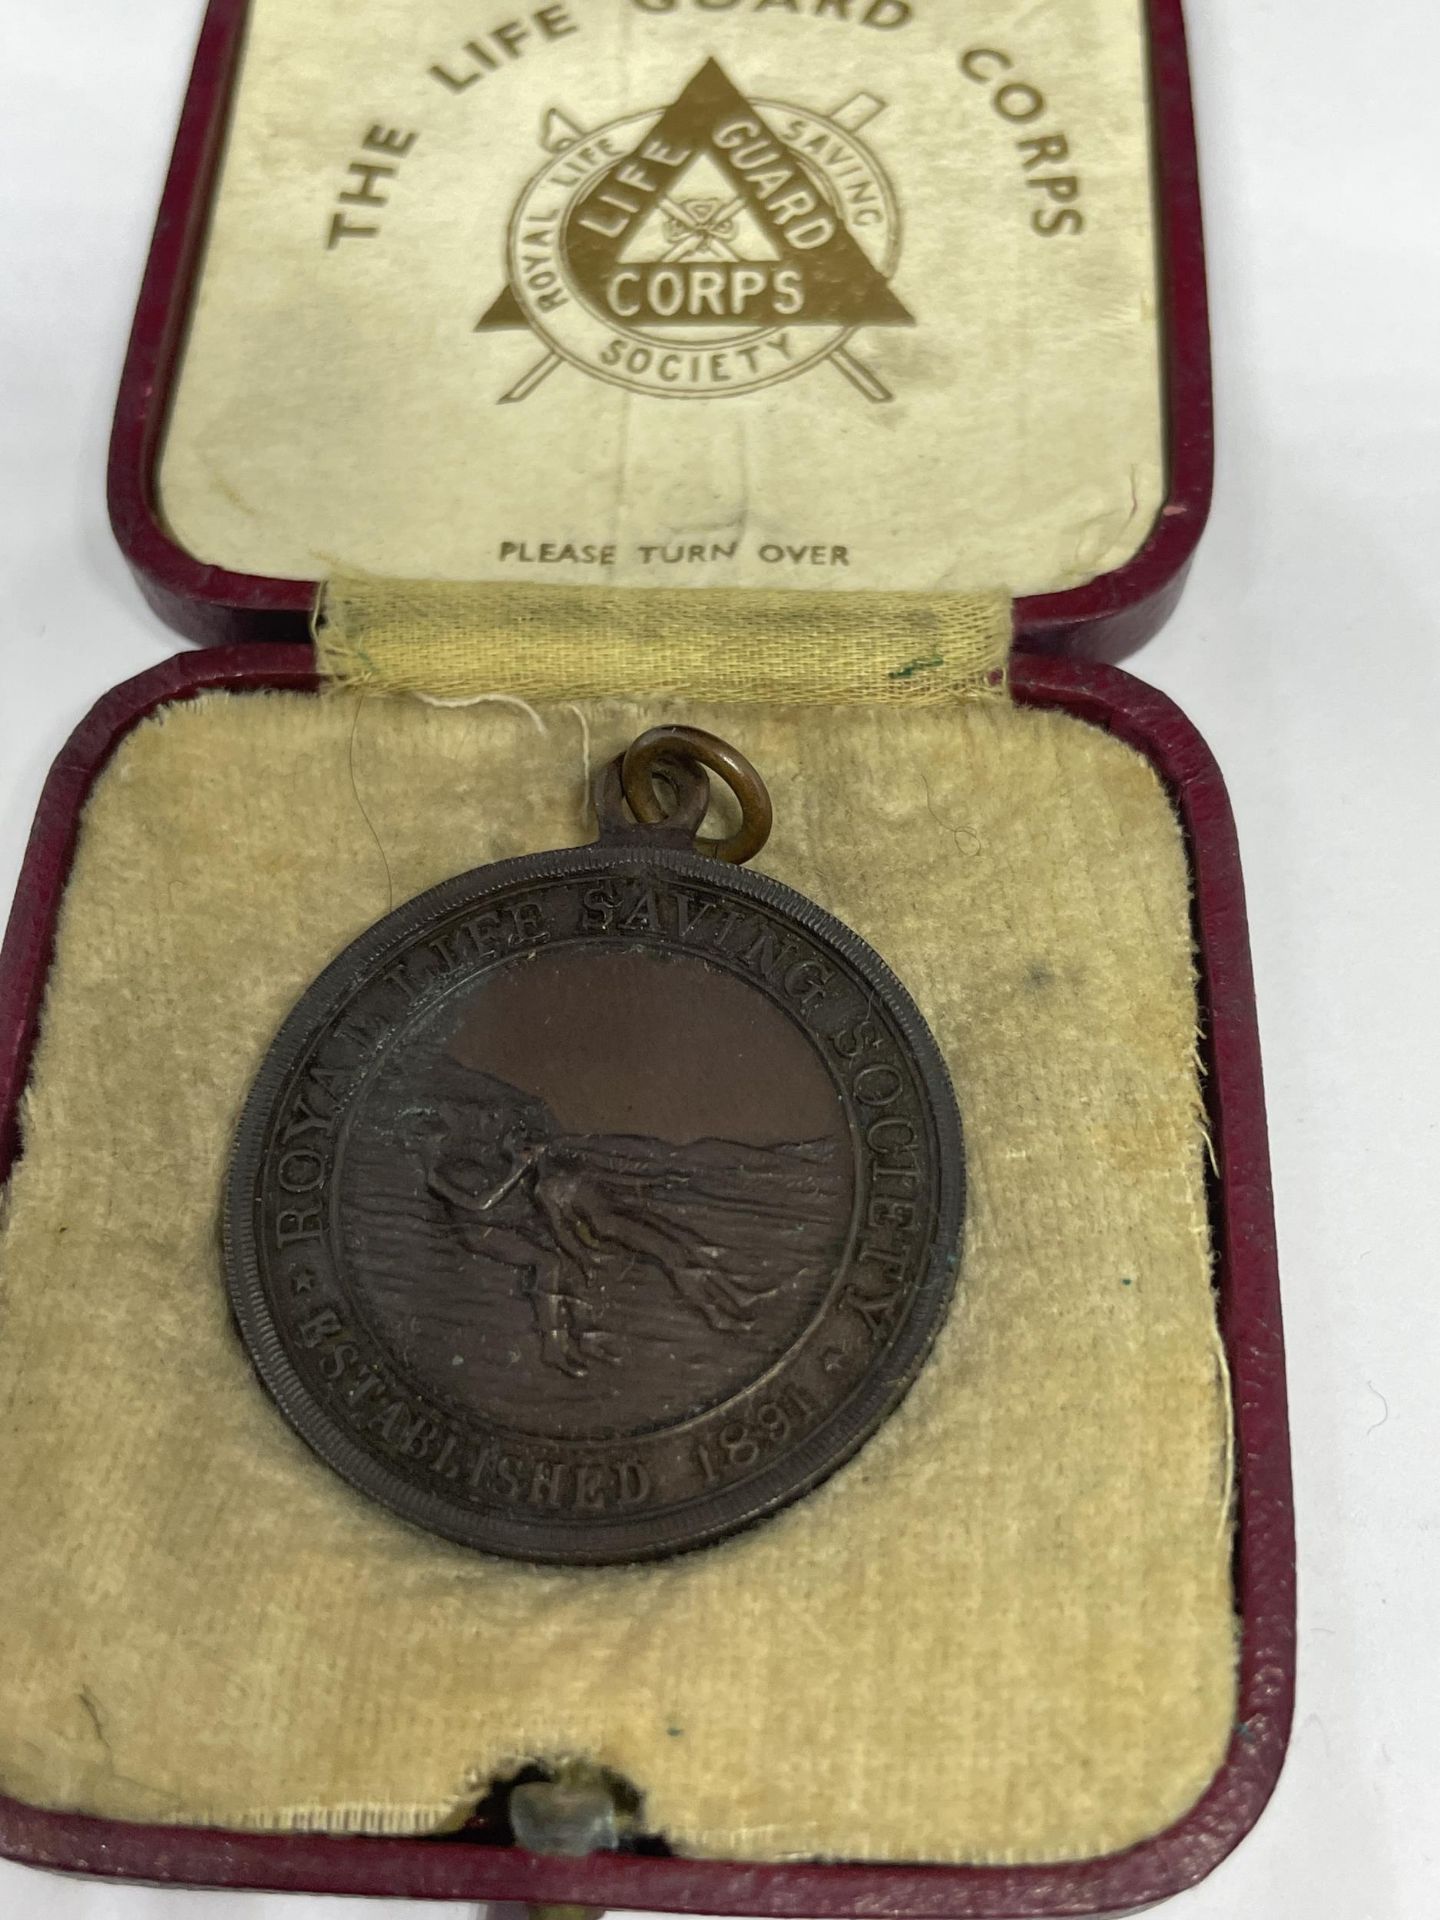 TWO VINTAGE MEDALS ONE LIFE GUARD CORPS 1936 AND HANLEY HIGH SCHOOL SACK RACE 1936 - Bild 2 aus 4